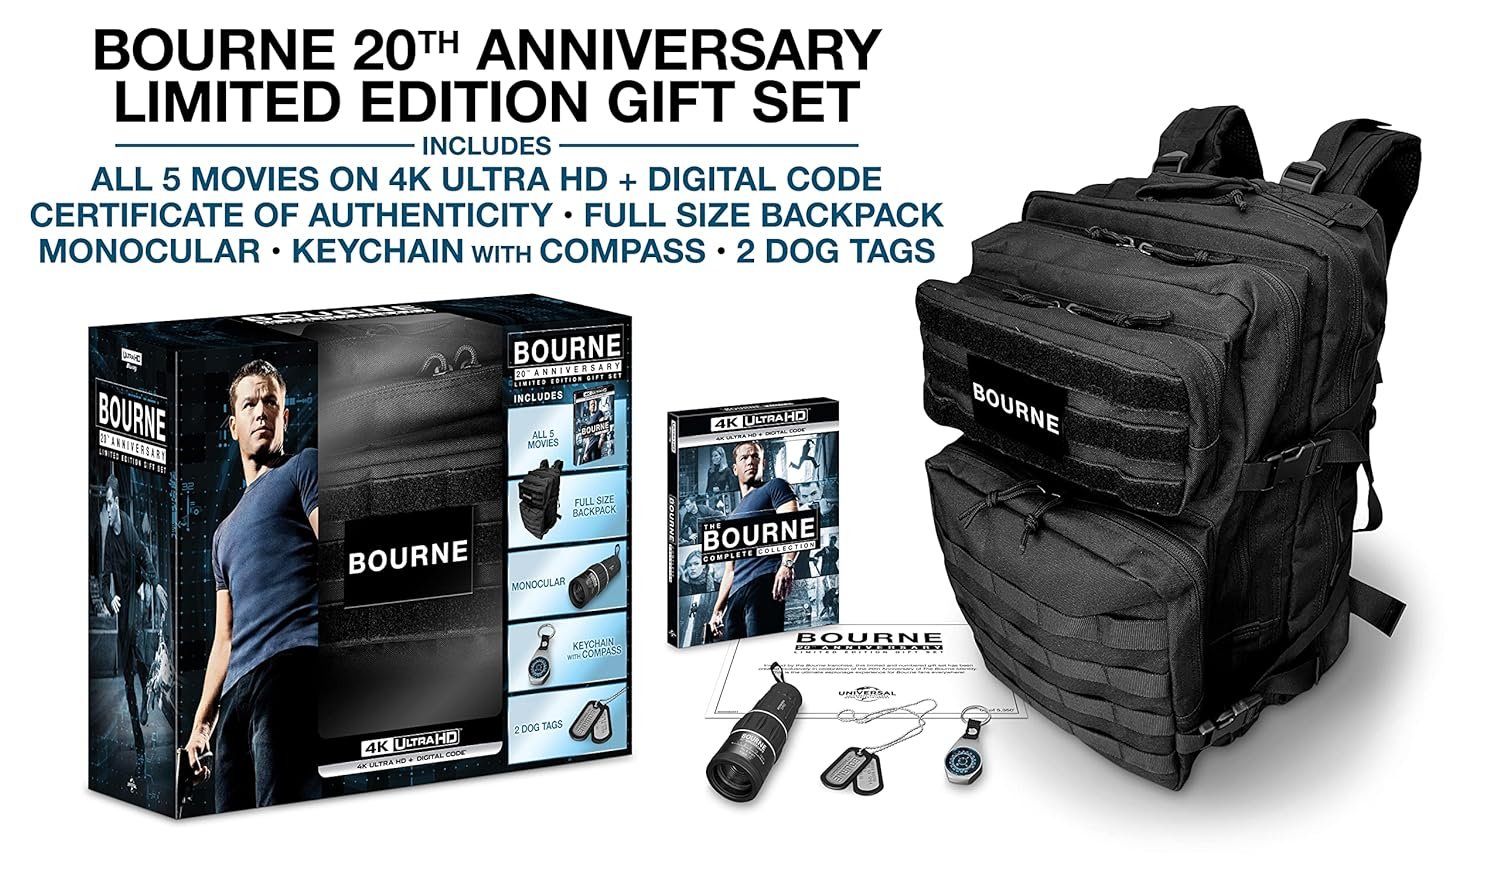 The Bourne Complete Collection - 20th Anniversary Limited Edition Gift Set (4K Ultra HD) [UHD] - image 4 of 4